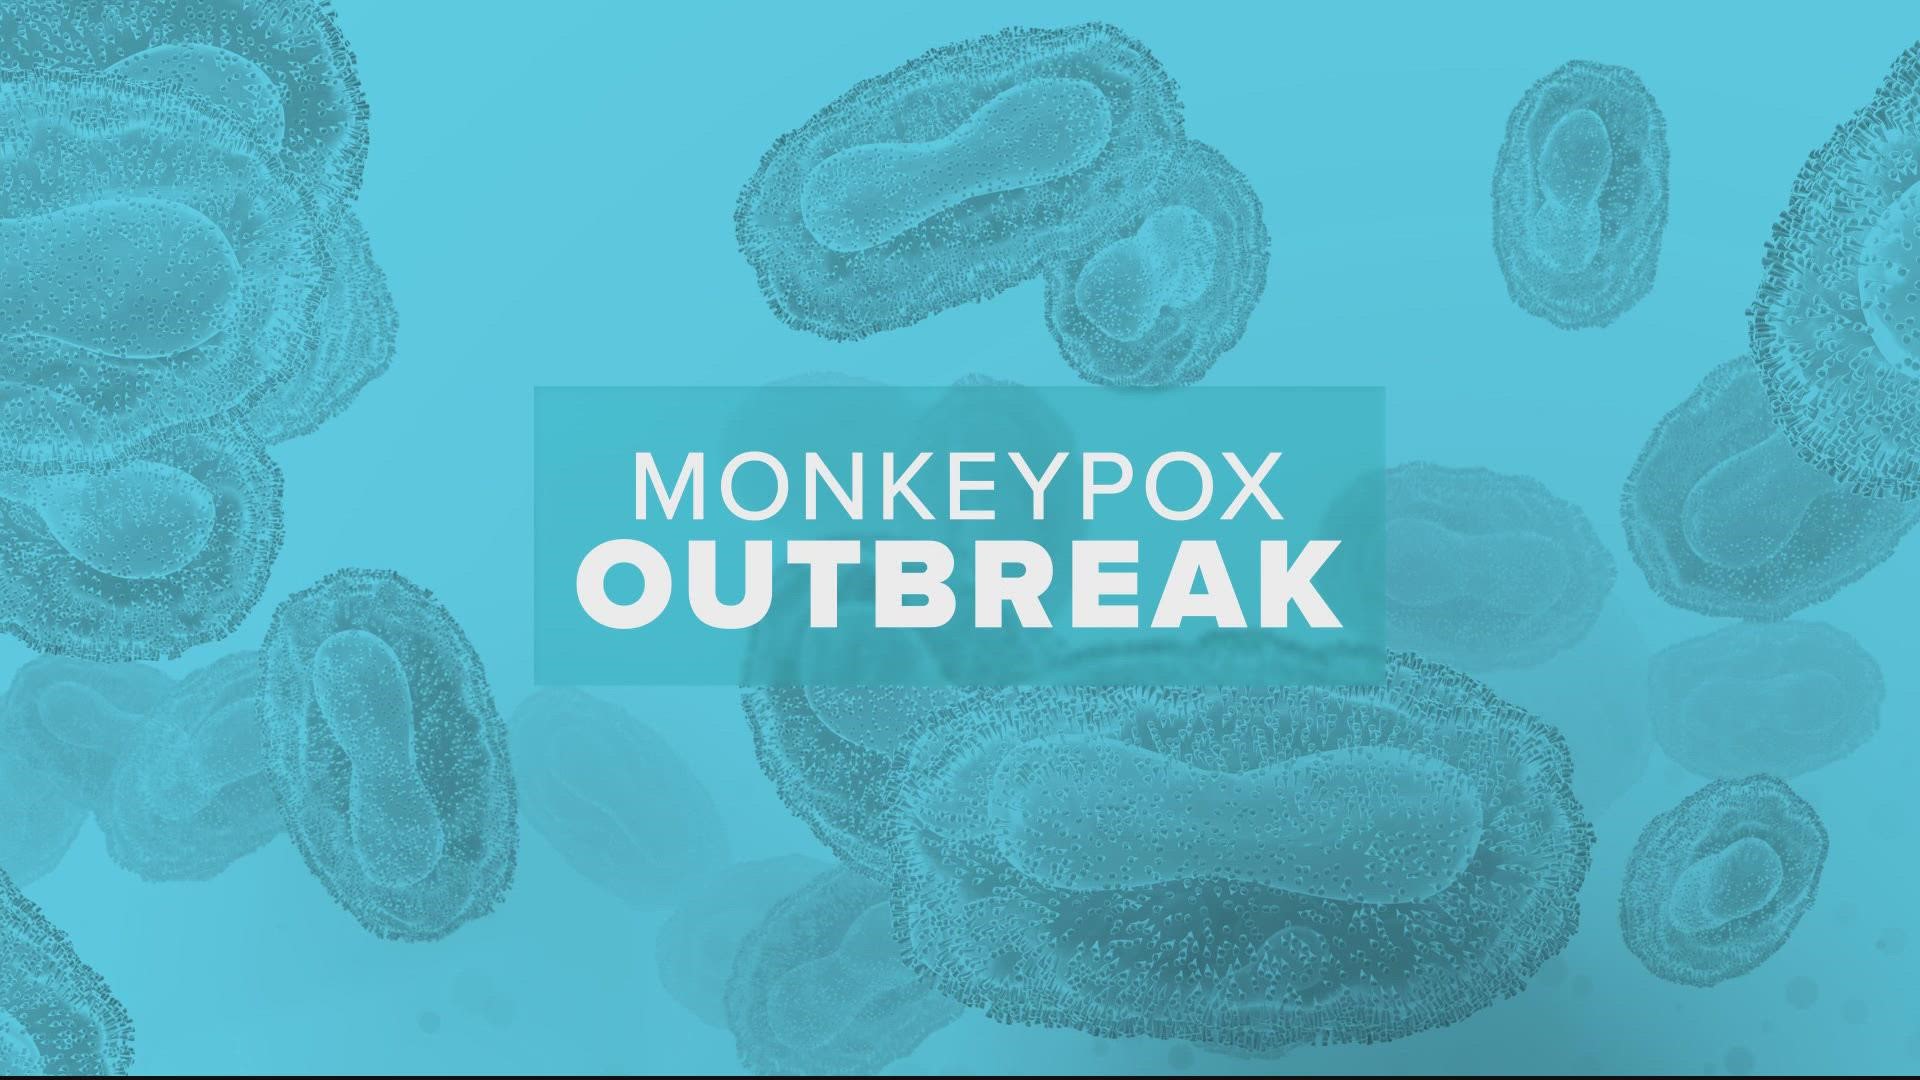 Data shows that monkeypox cases are on the decline since the initial peak.